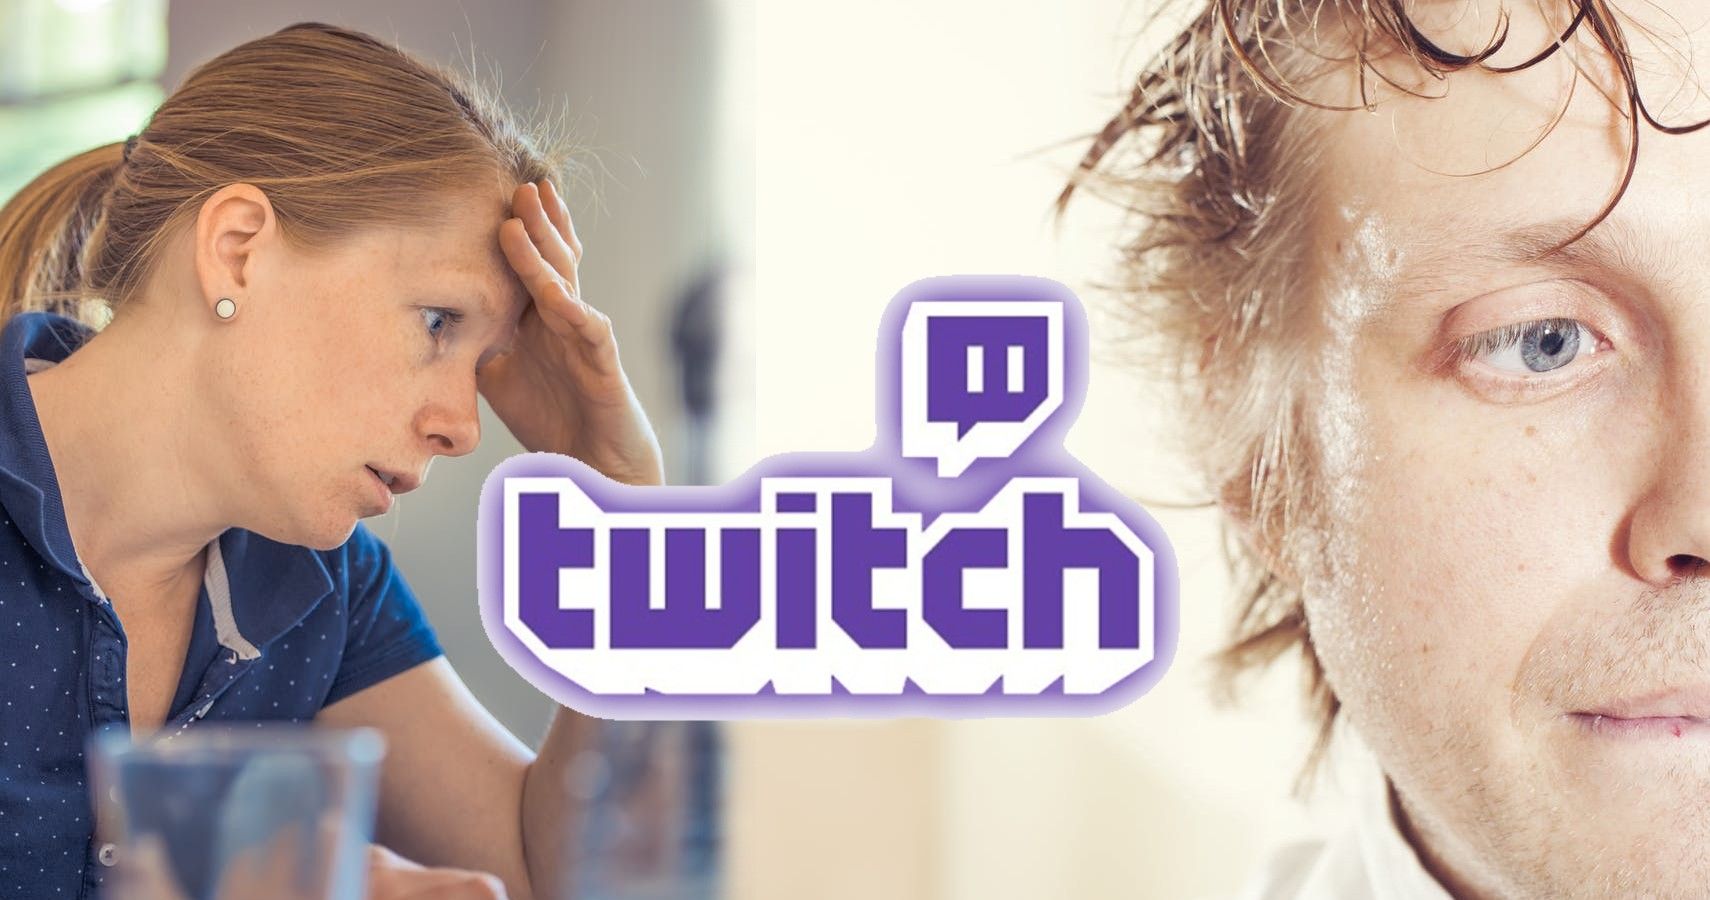 A mother was barely able to recover $20,000 from Twitch